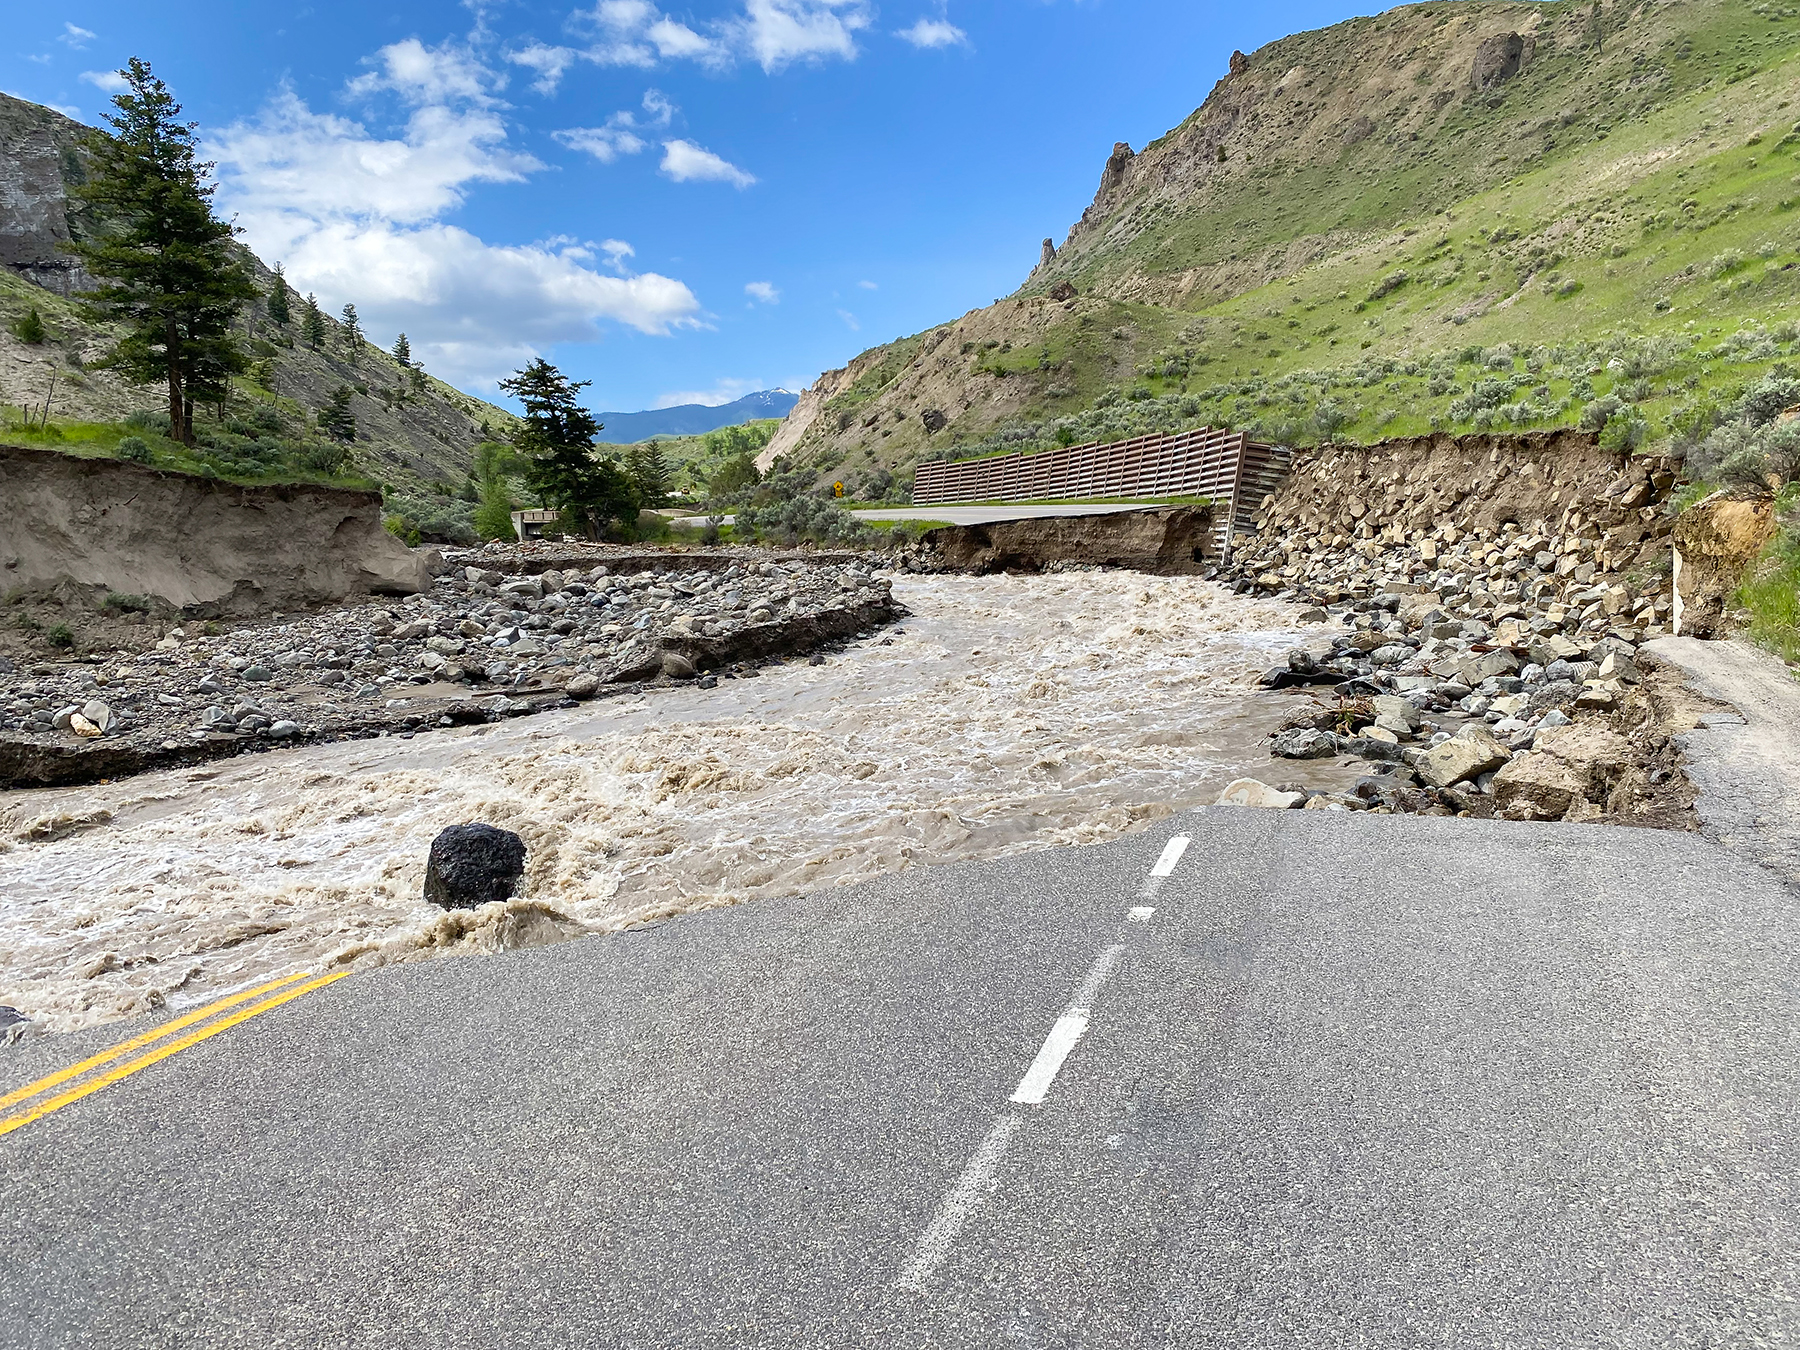 Extensive flood damage from the Gardner River rendered Yellowstone’s North Entrance Road impassable, raising the prospect that the critical roadway may need to be relocated away from the environmentally sensitive Gardner Canyon. (Photograph courtesy of NPS / Jacob W. Frank)